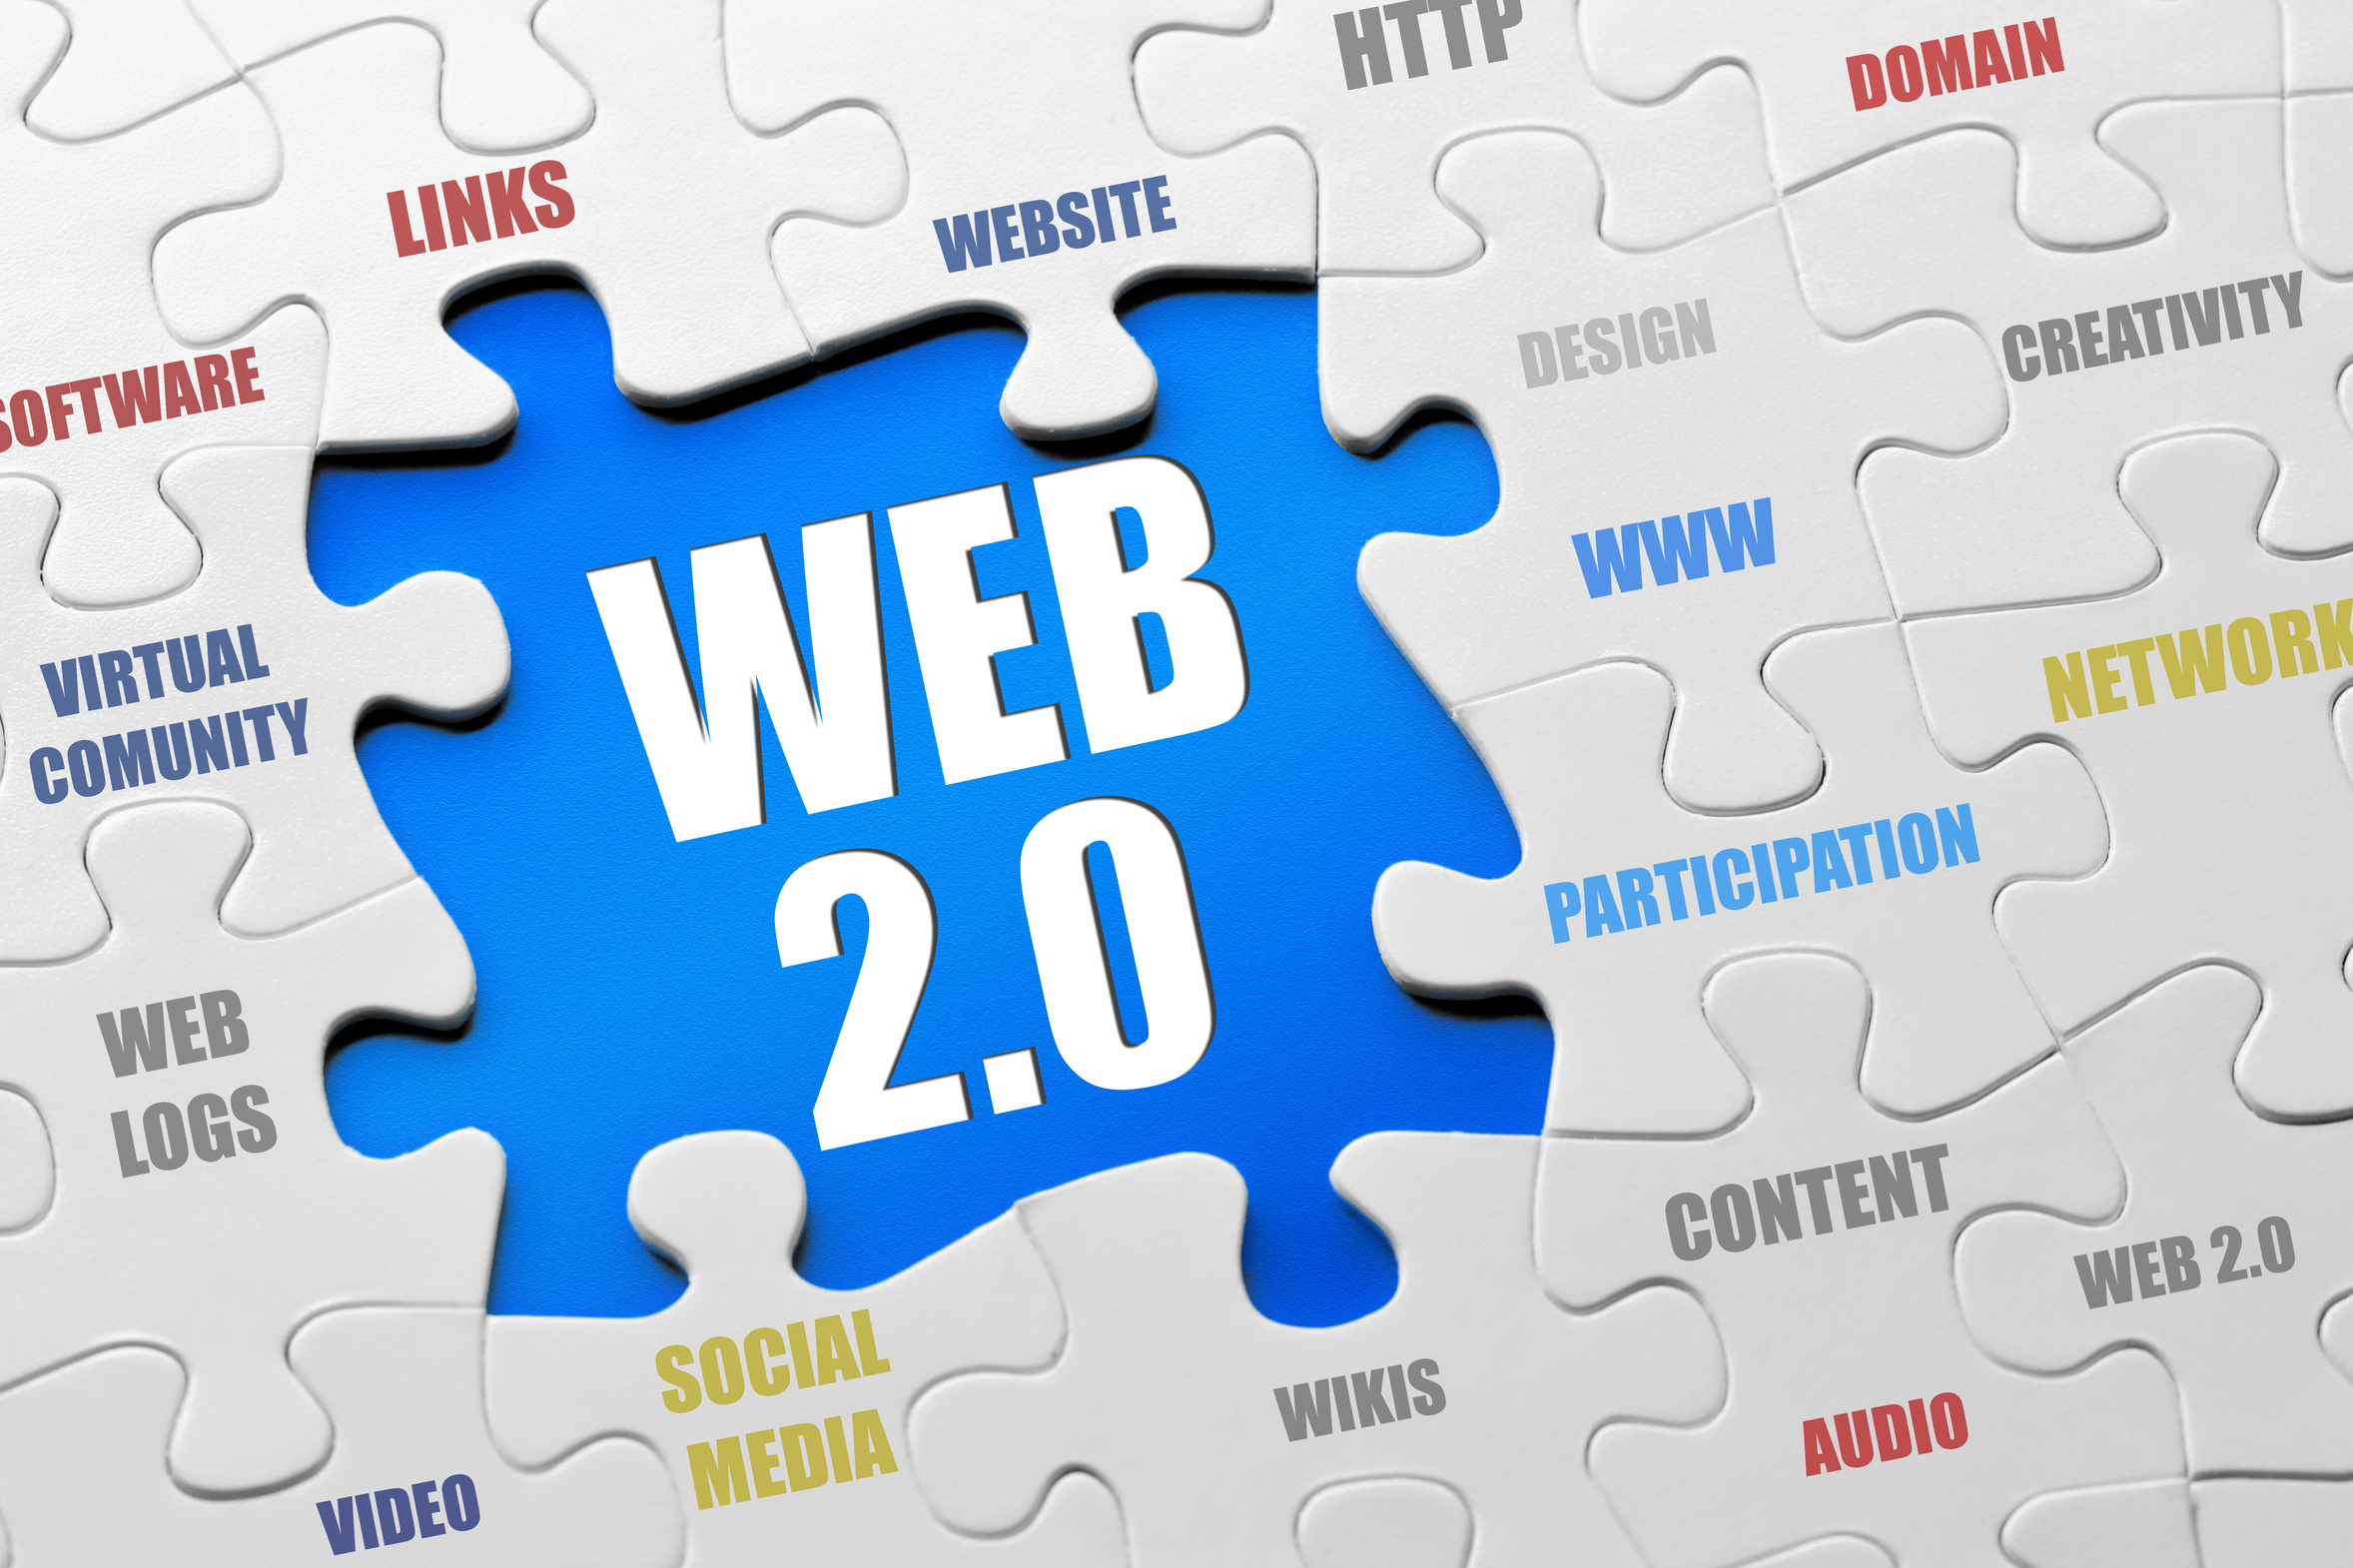 20 Manual Web 2.0 Submission to High DA Sites